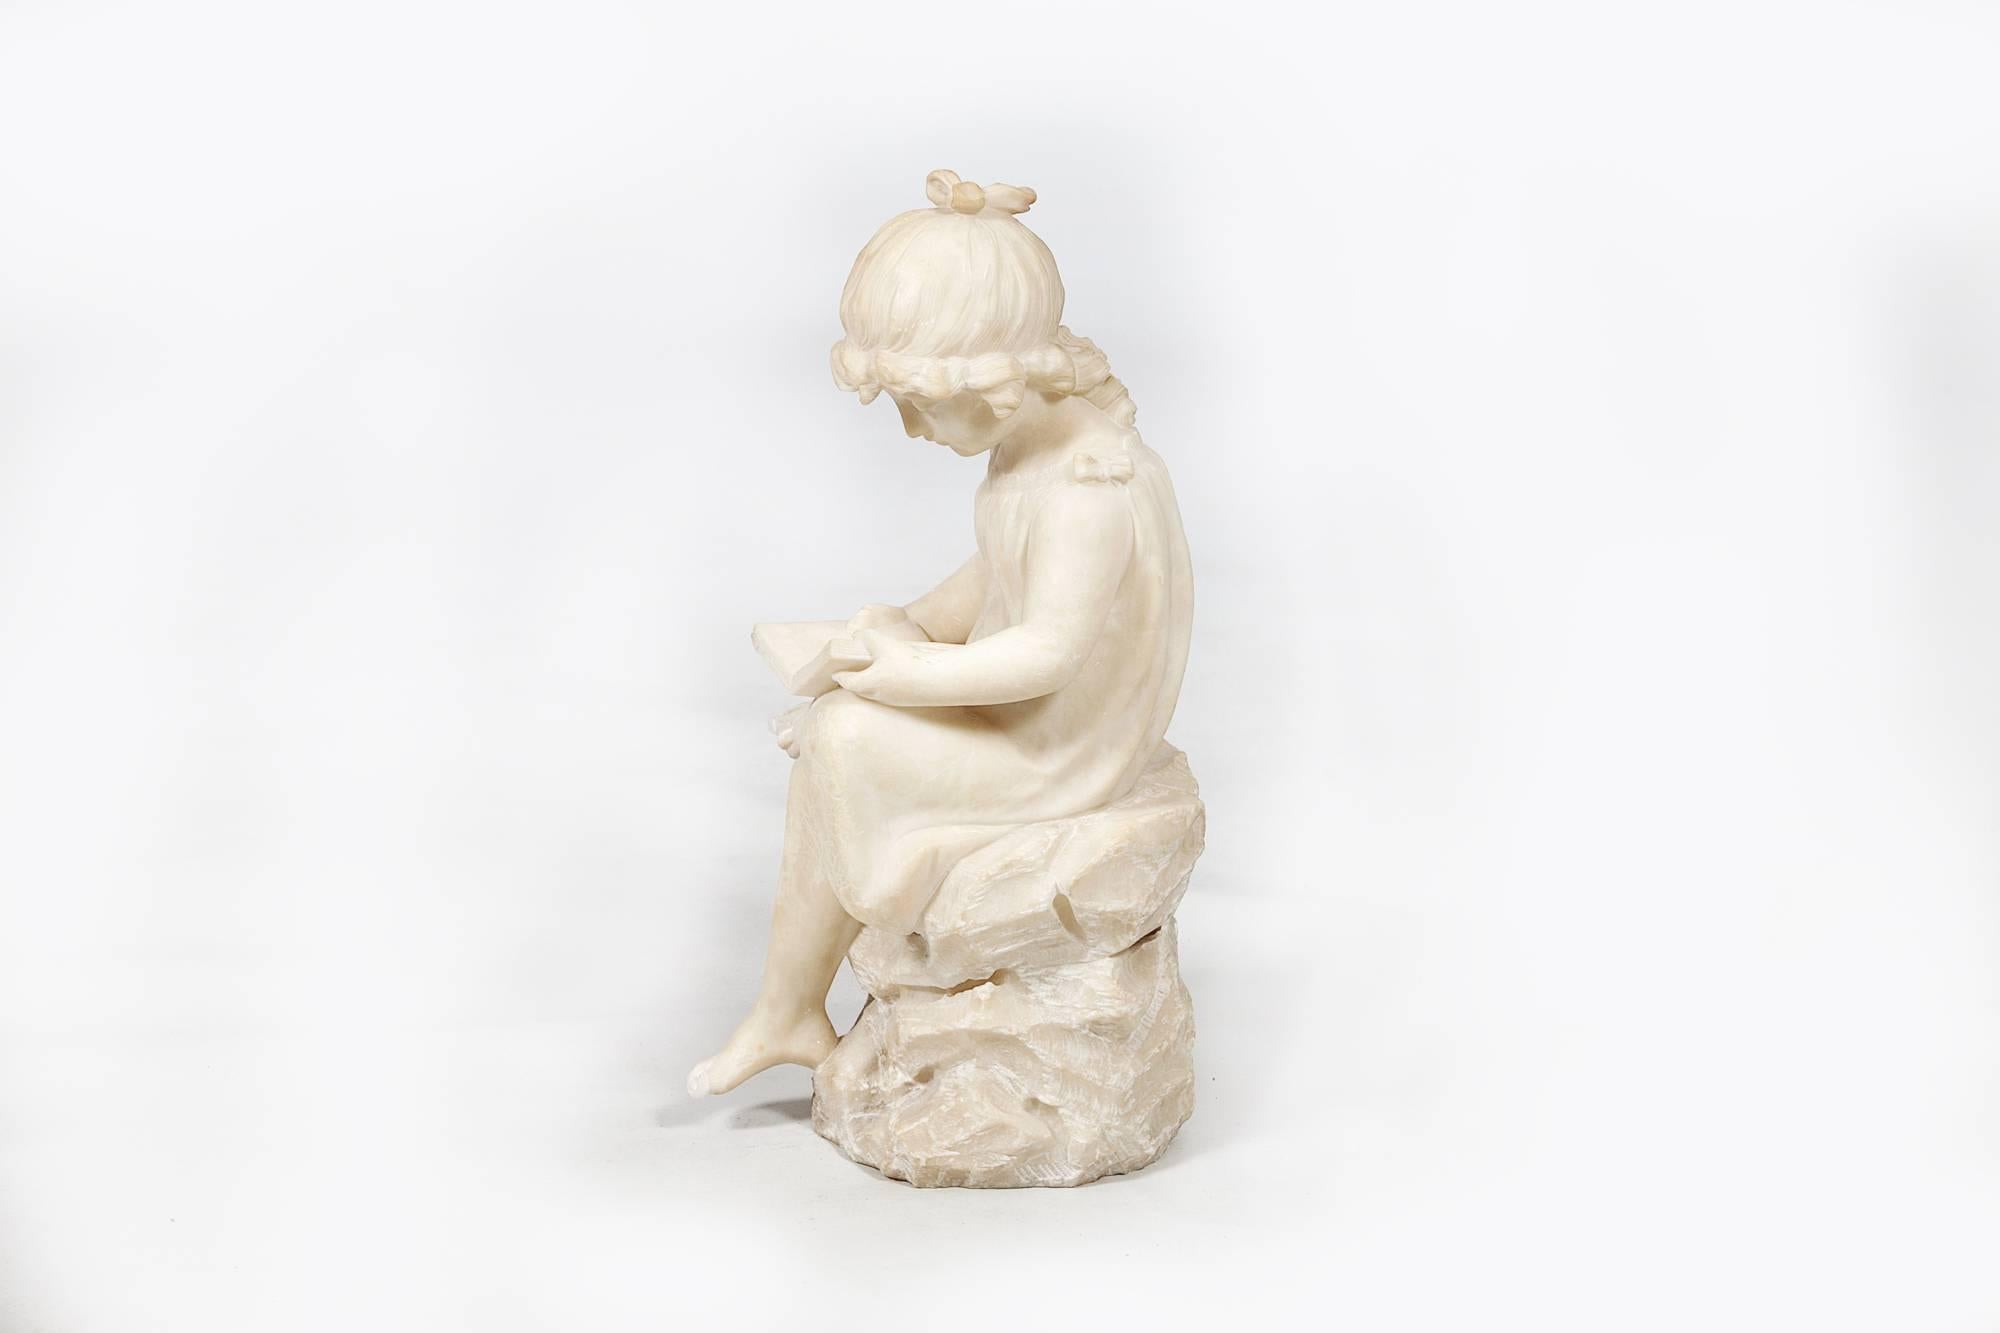 19th century white marble statue of a young girl sitting reading.